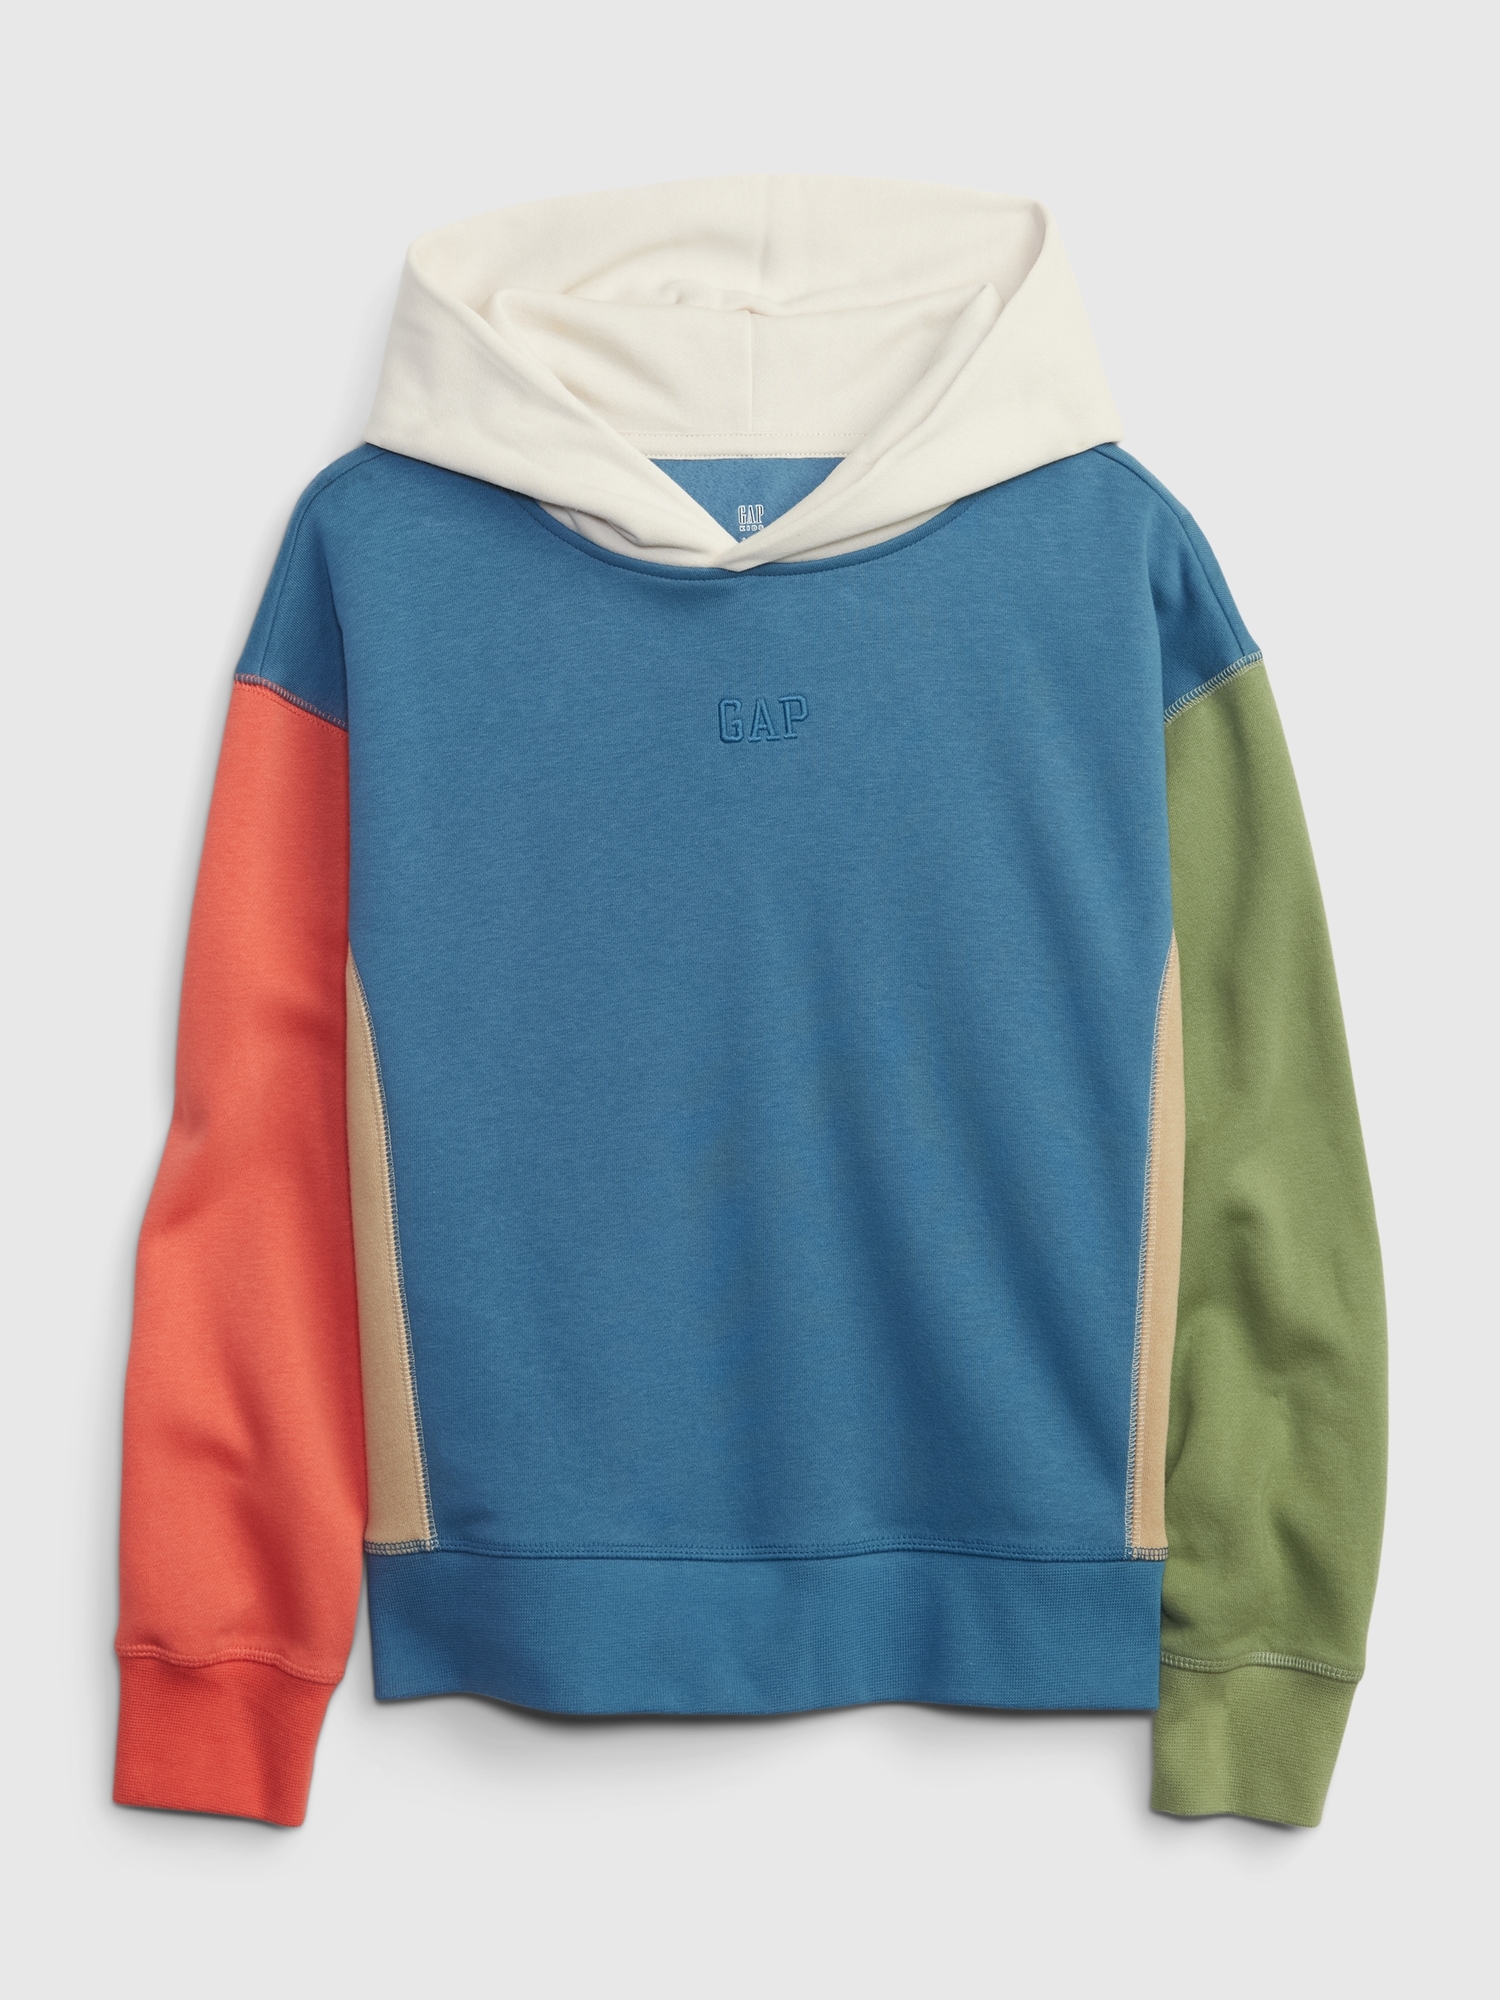 NEW GAP GRAPHIC HOODIE SIZE XS 4/5 S 6/7 M 8 